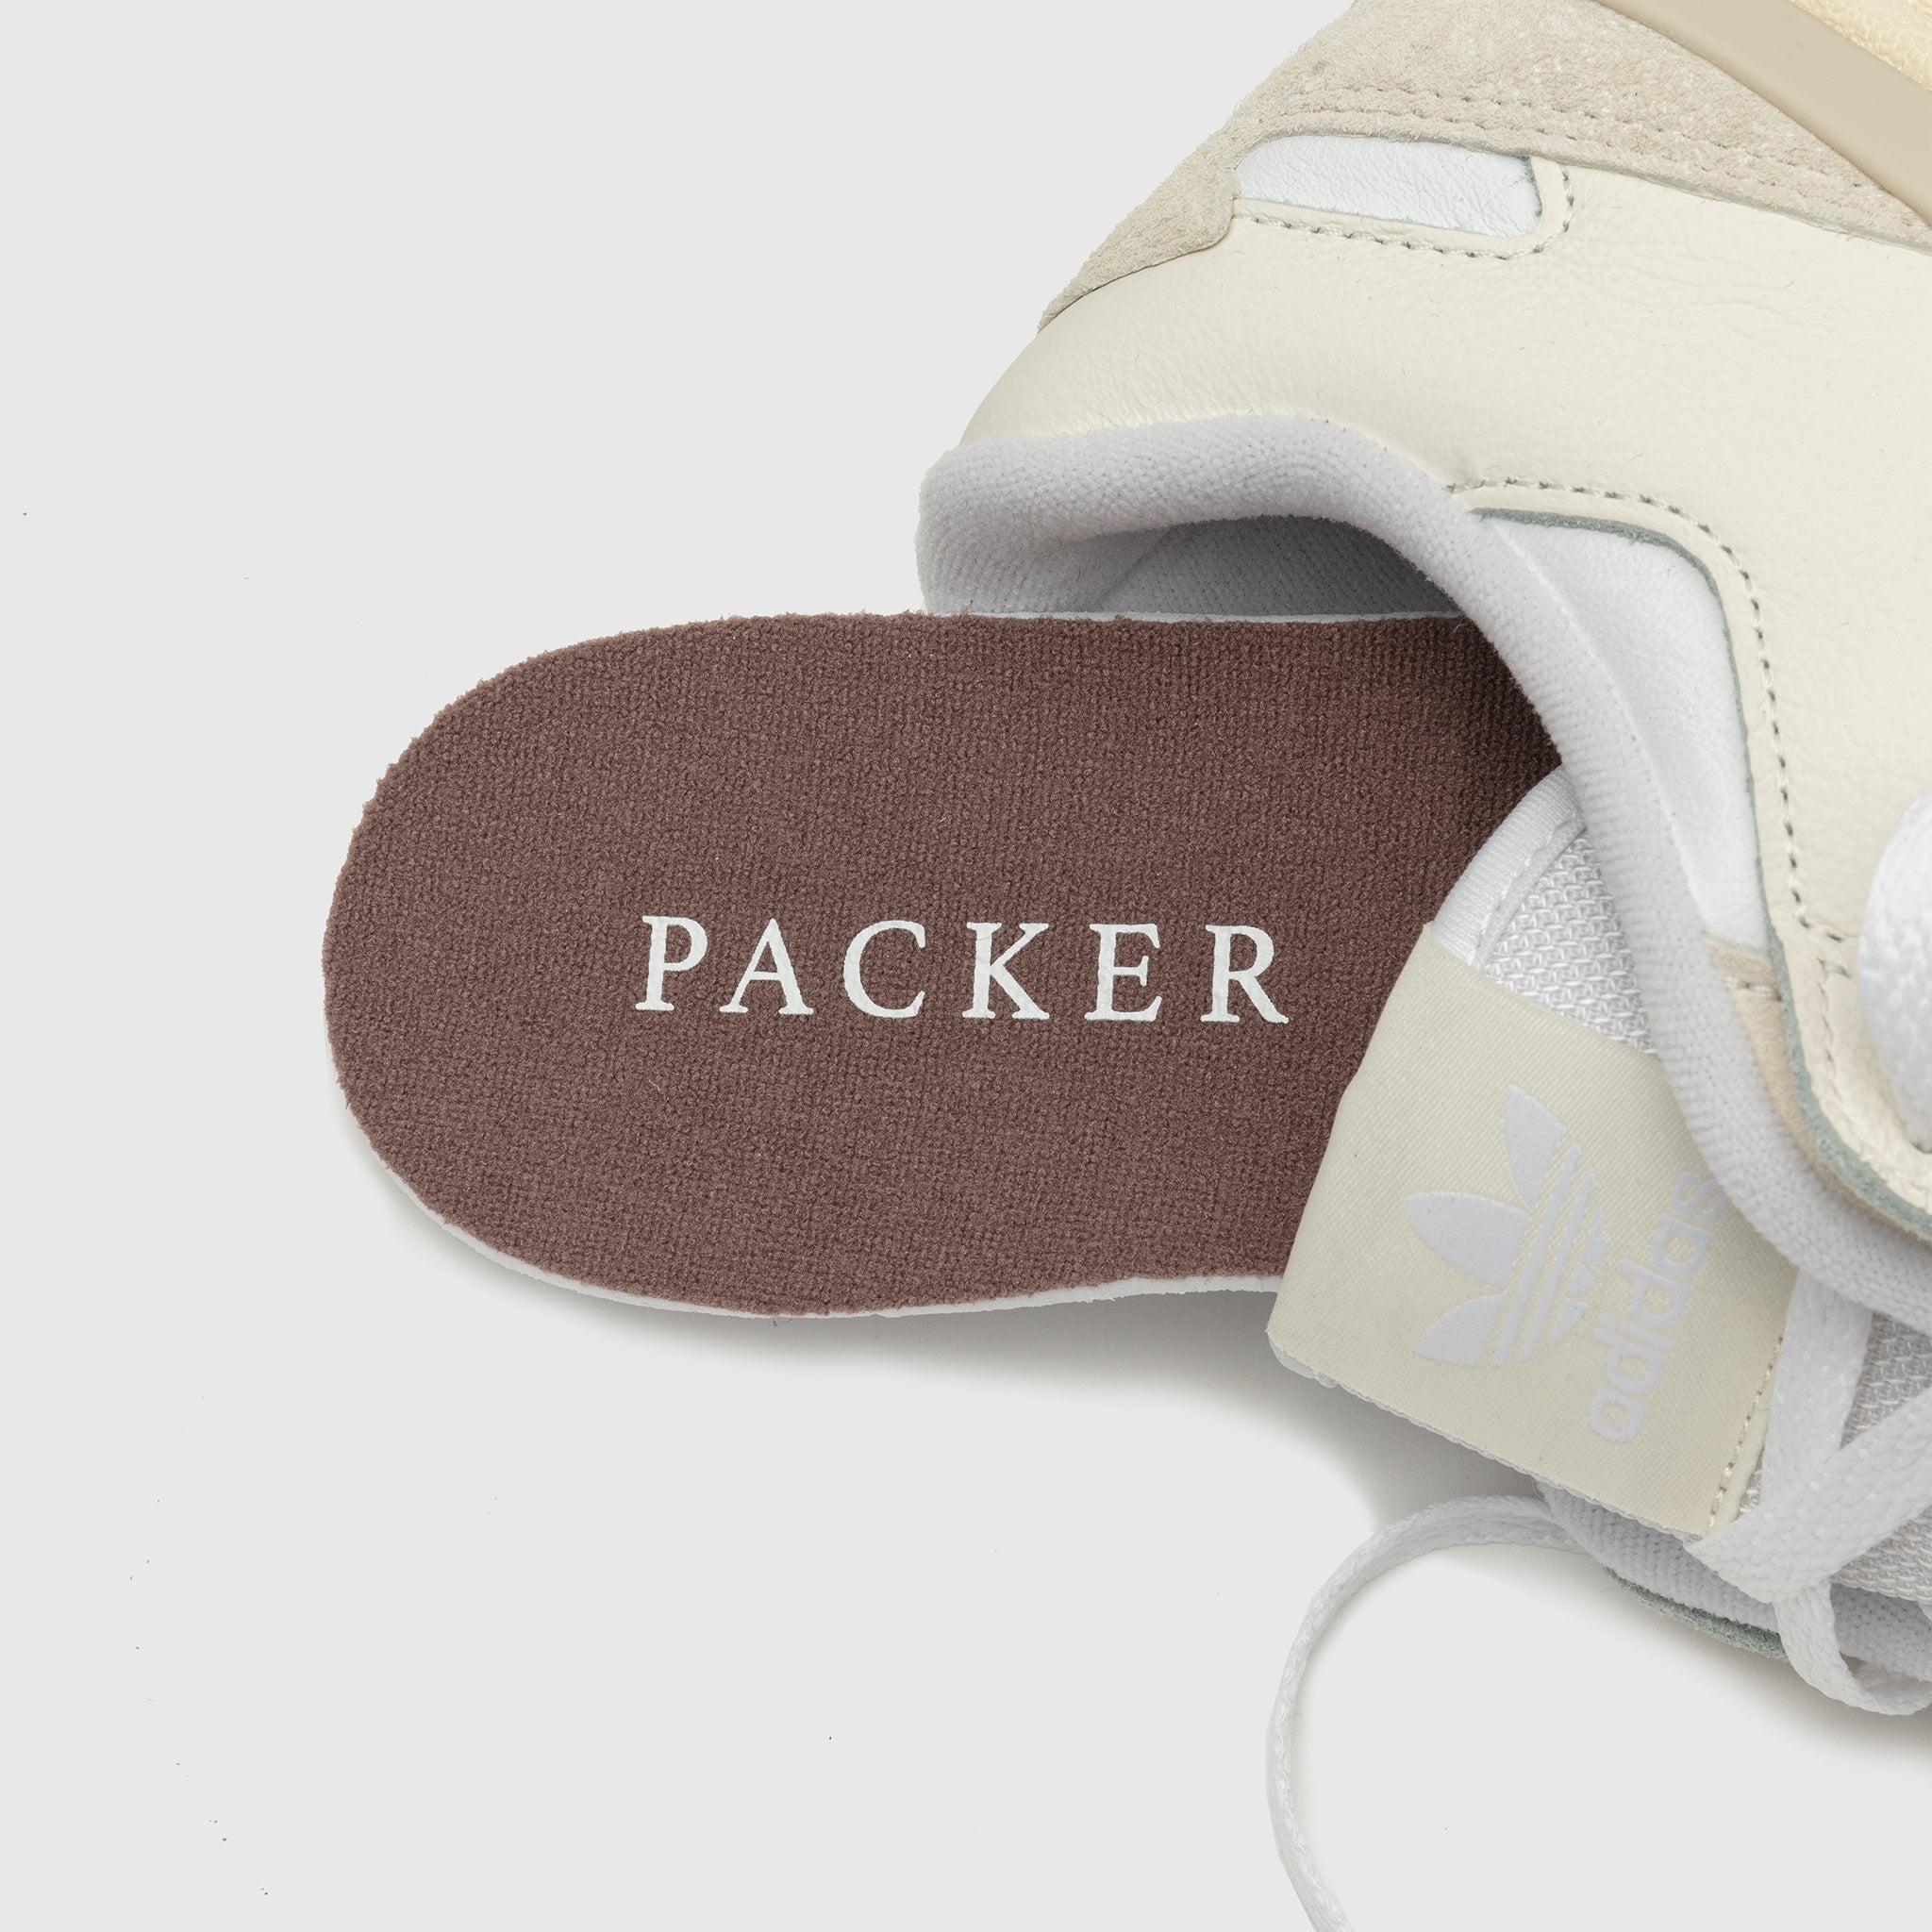 PACKER X ADIDAS FORUM 84 LOW "COCOA"